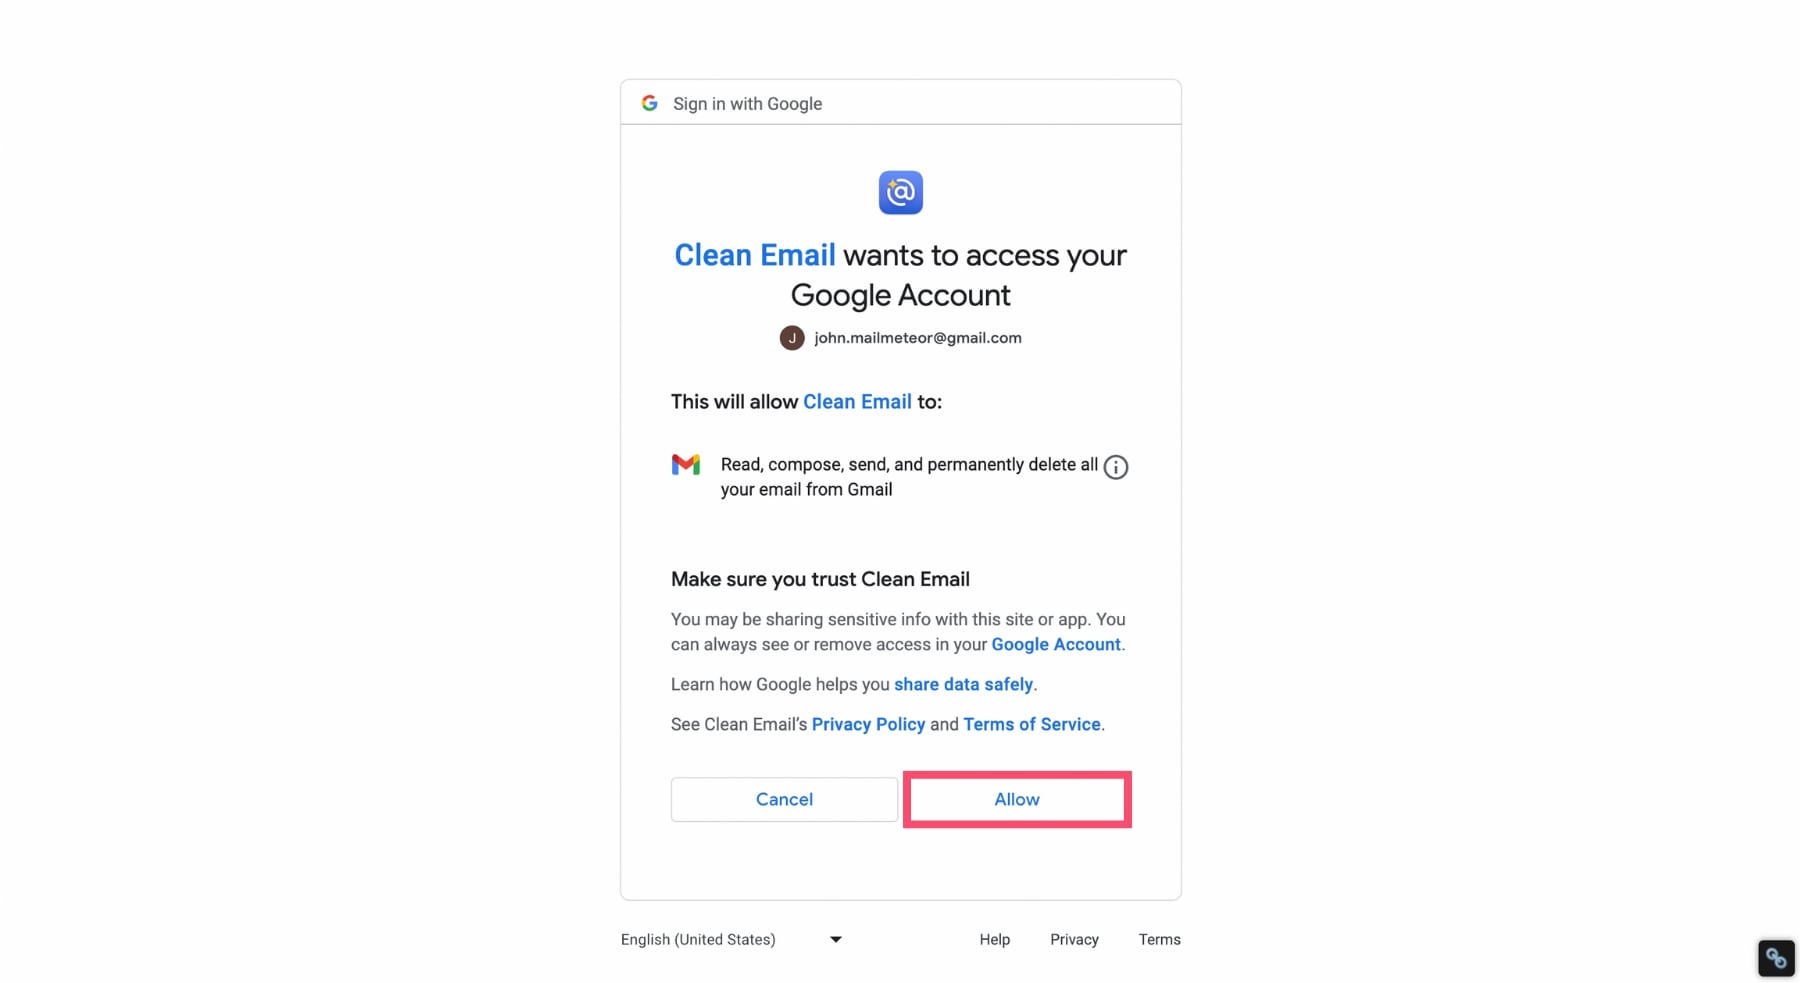 Let Clean Email access your inbox